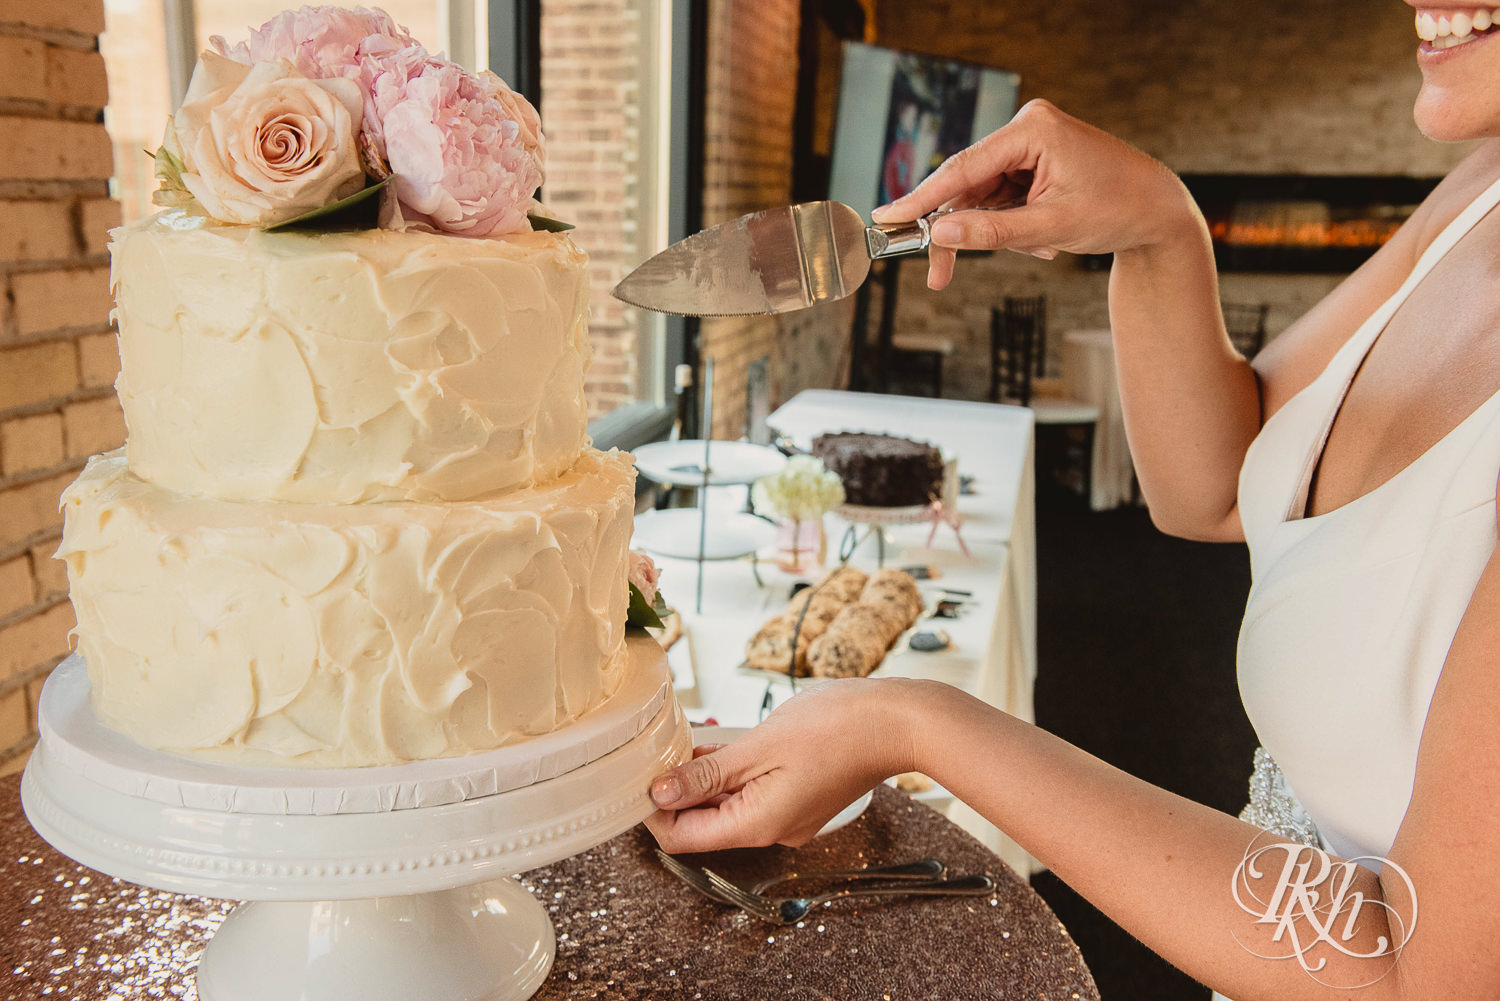 Bride and groom cut wedding cake during wedding reception at Minneapolis Event Centers in Minneapolis, Minnesota.